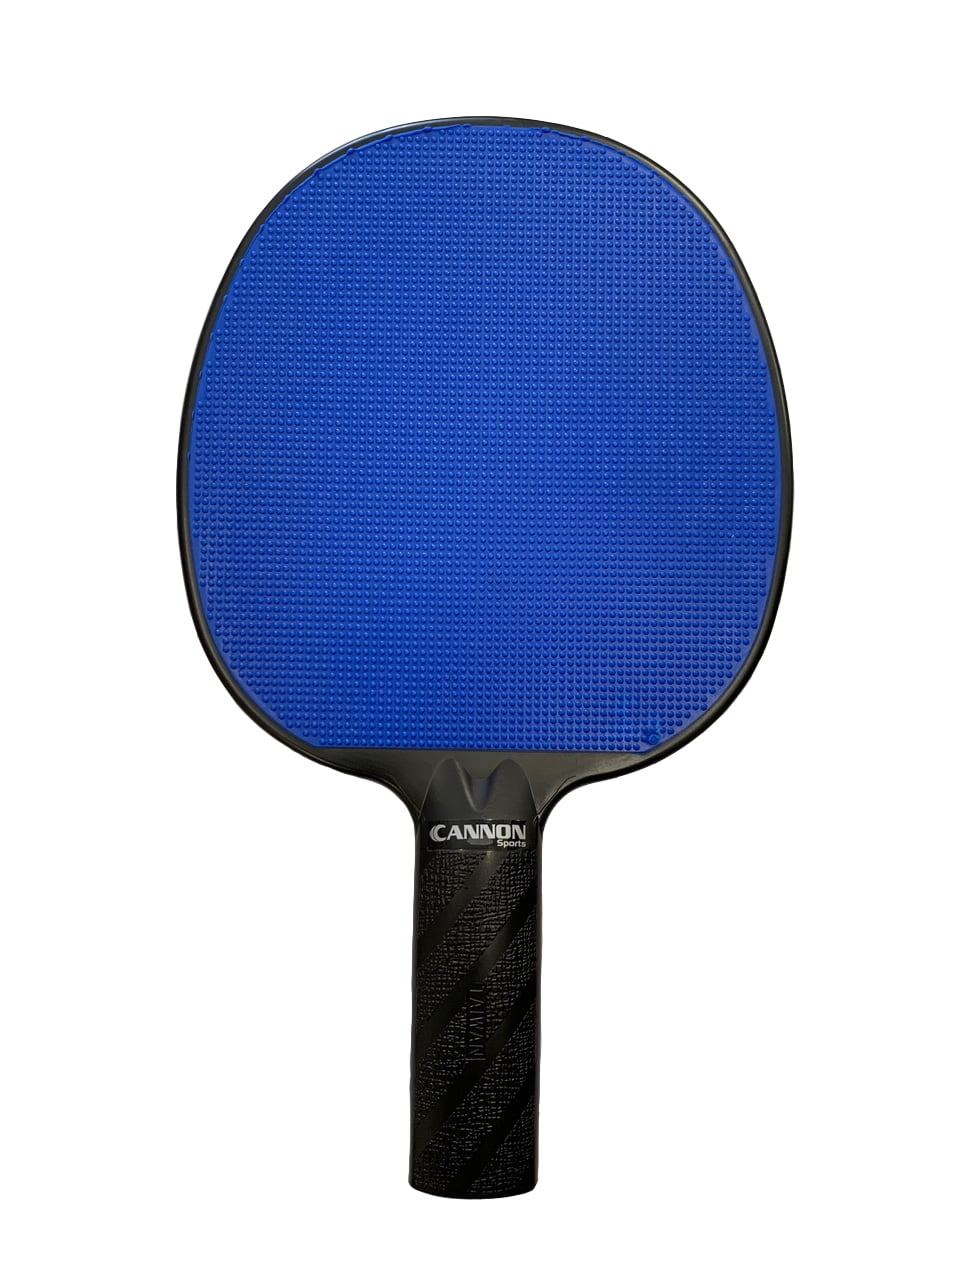 Unbreakable and Weather Resistant for Ind... Cannon Sports Table Tennis Paddle 